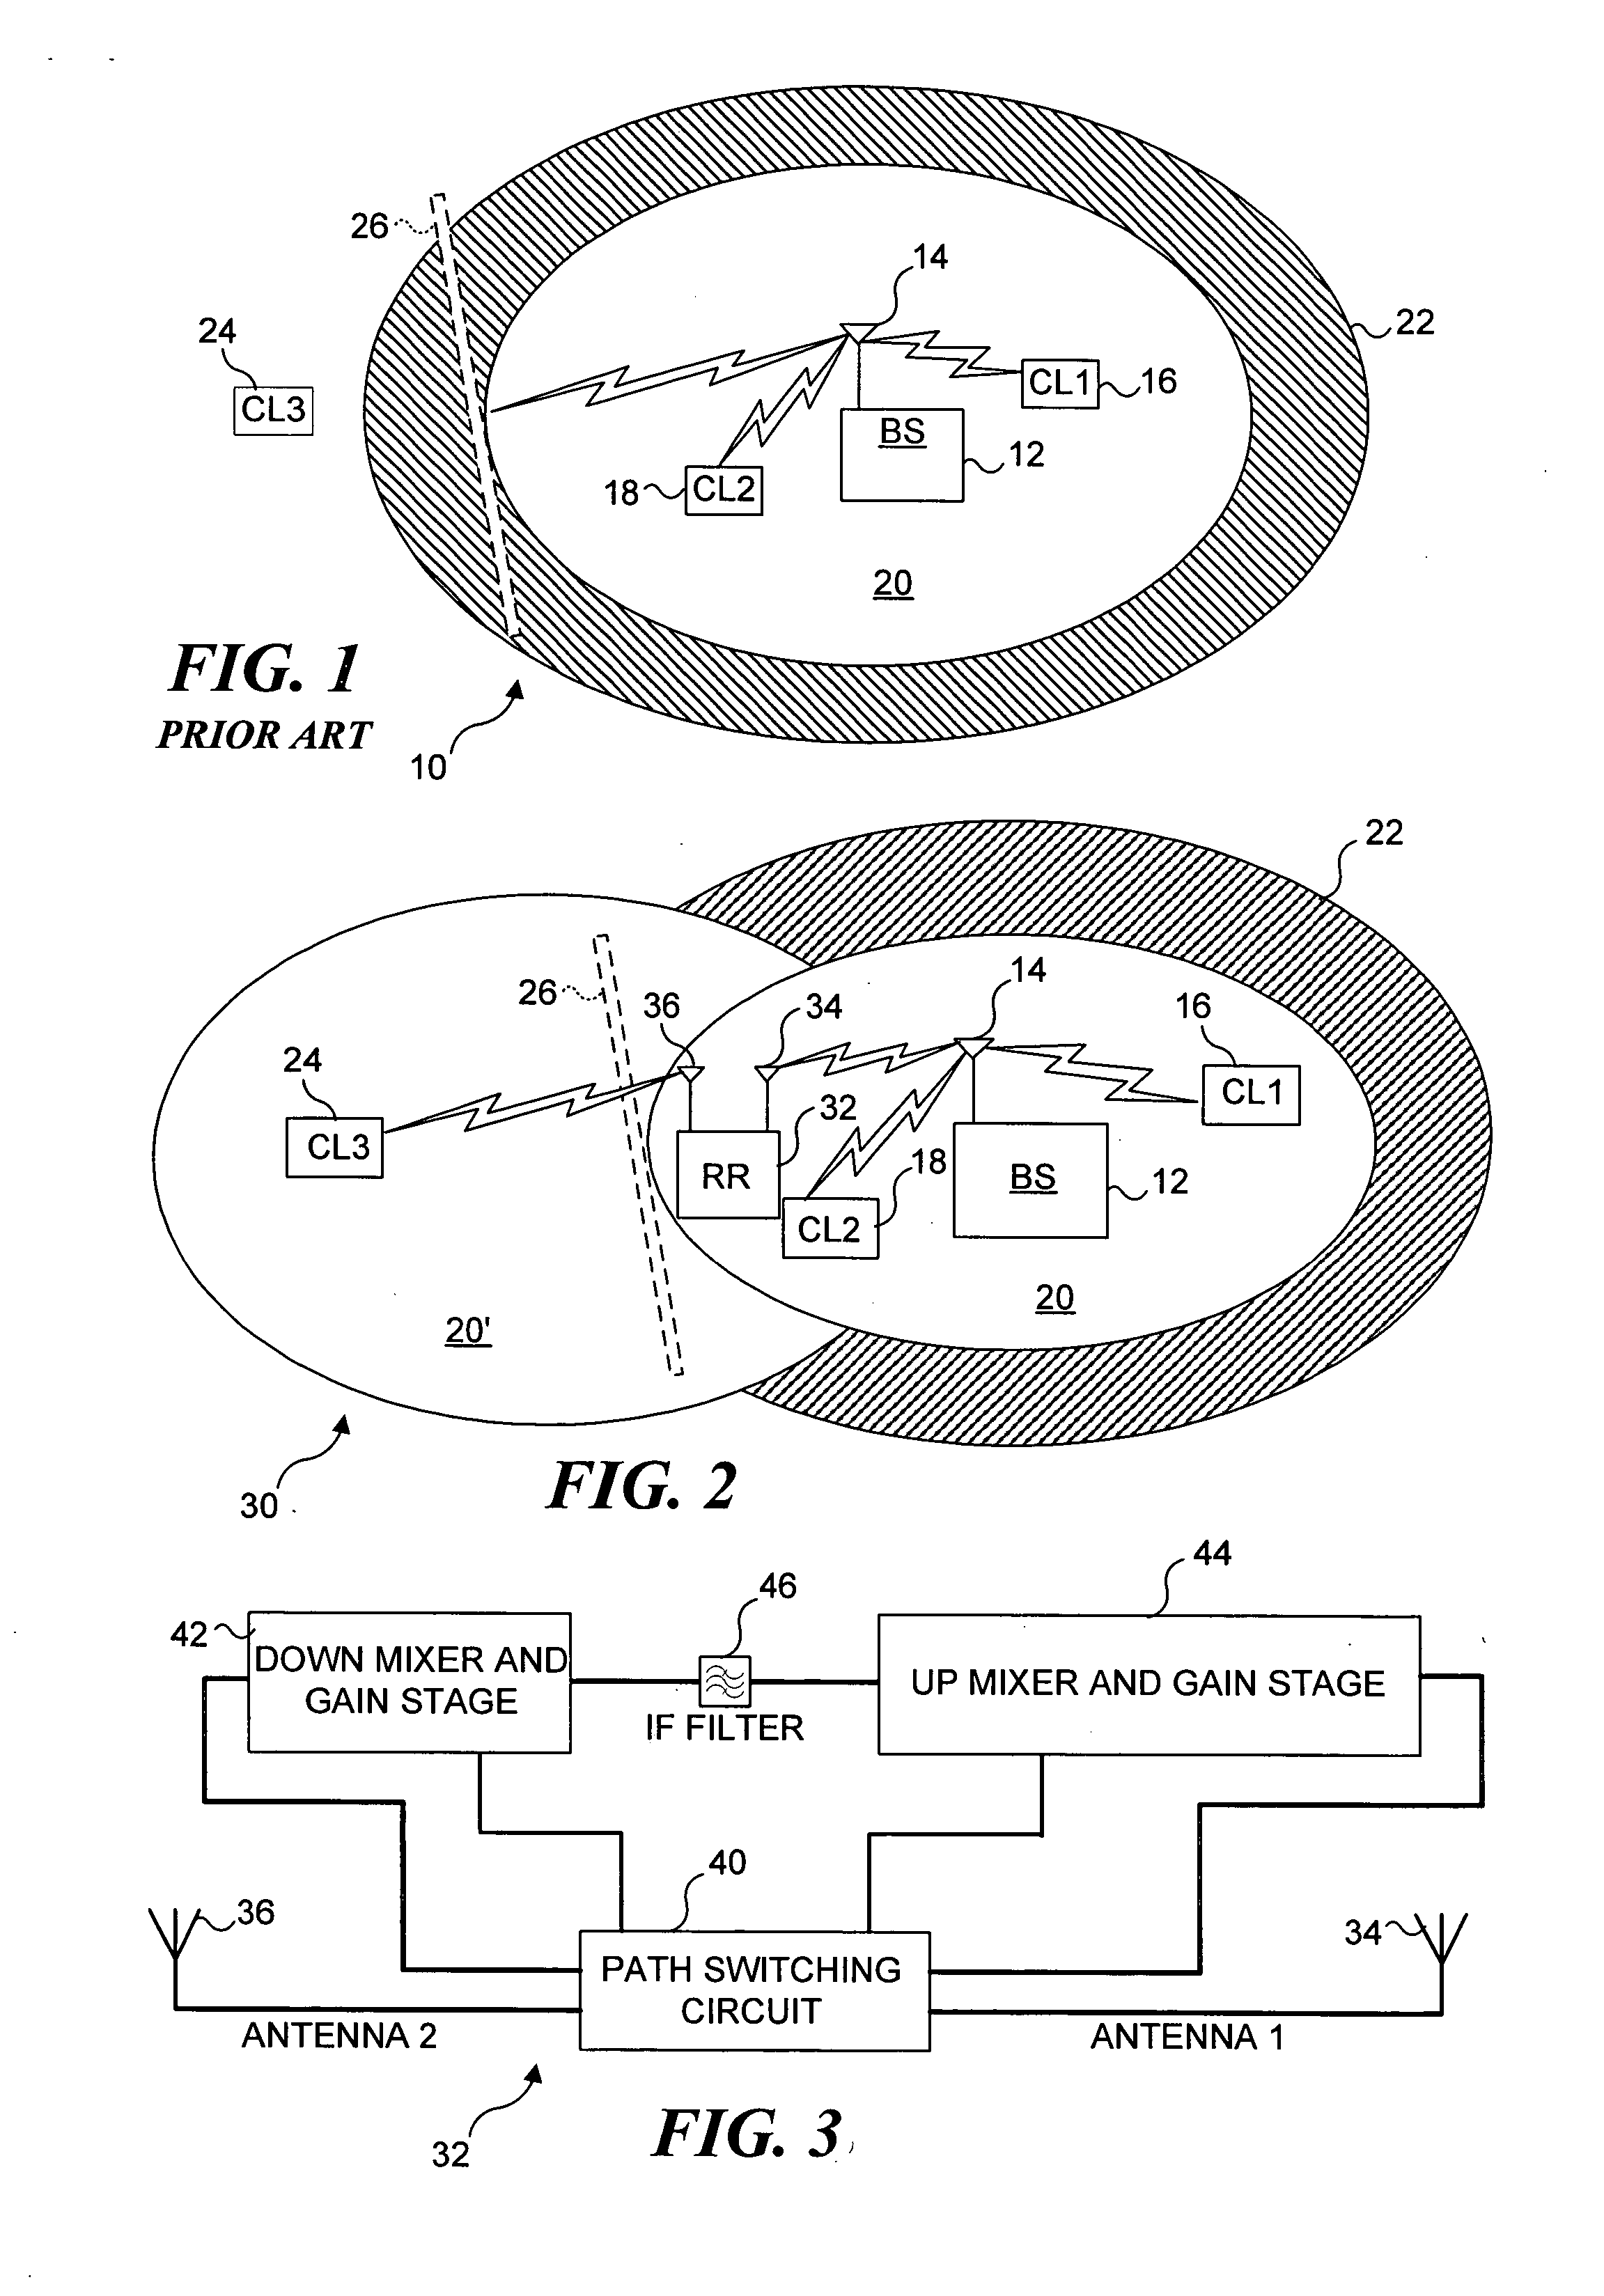 Wireless local area network translating bi-directional packet repeater